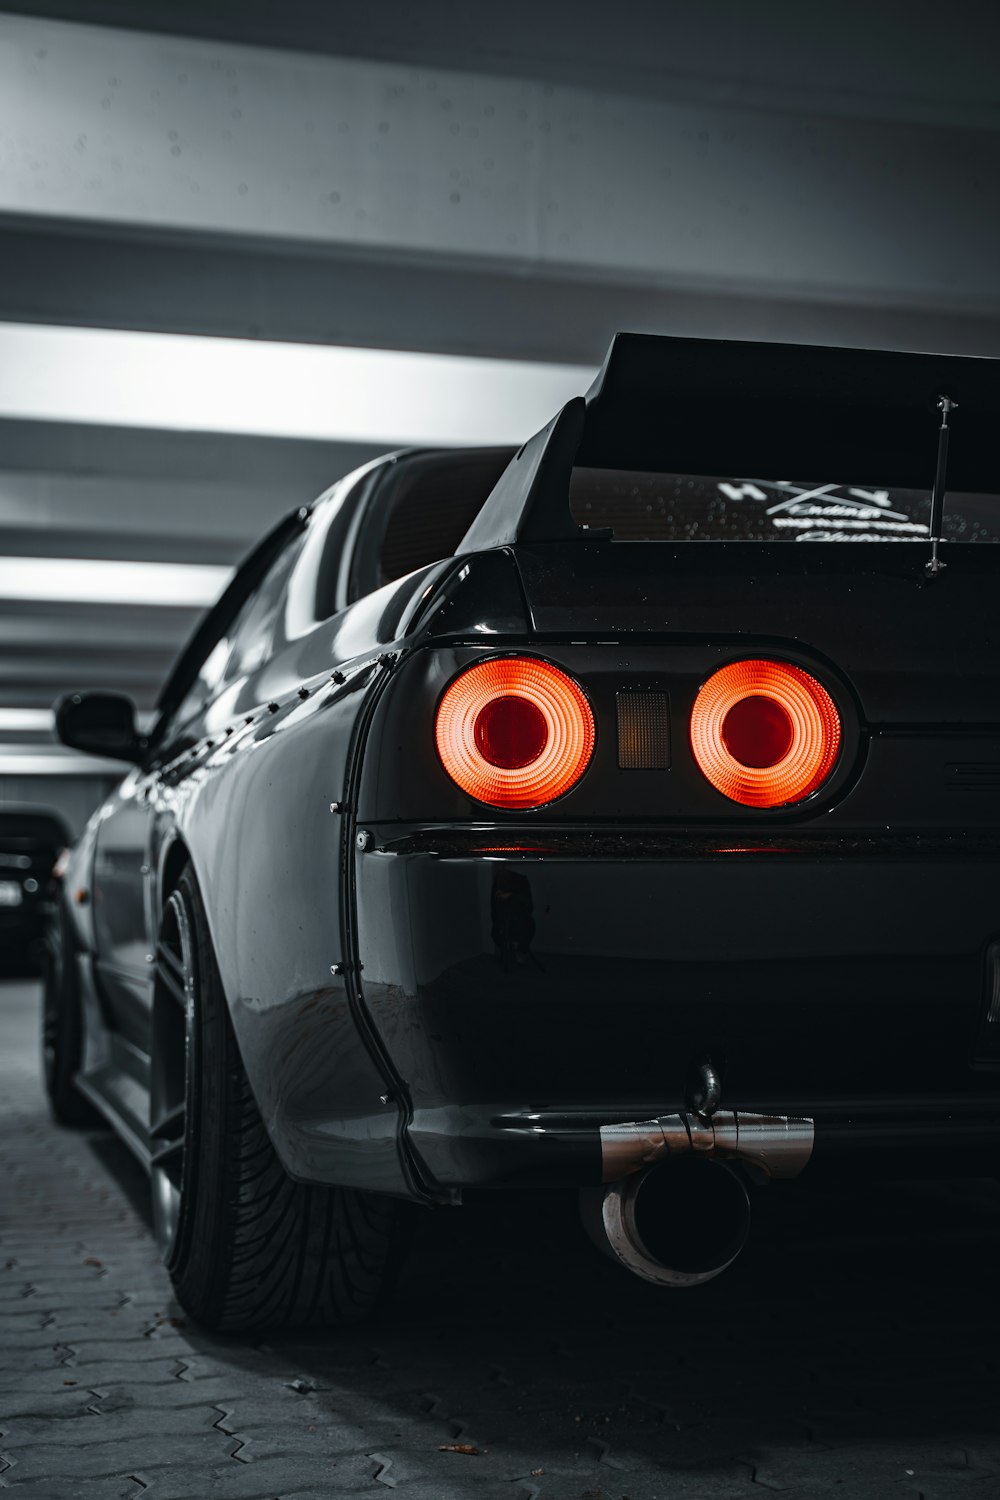 R32 Pictures Download Free Images On Unsplash